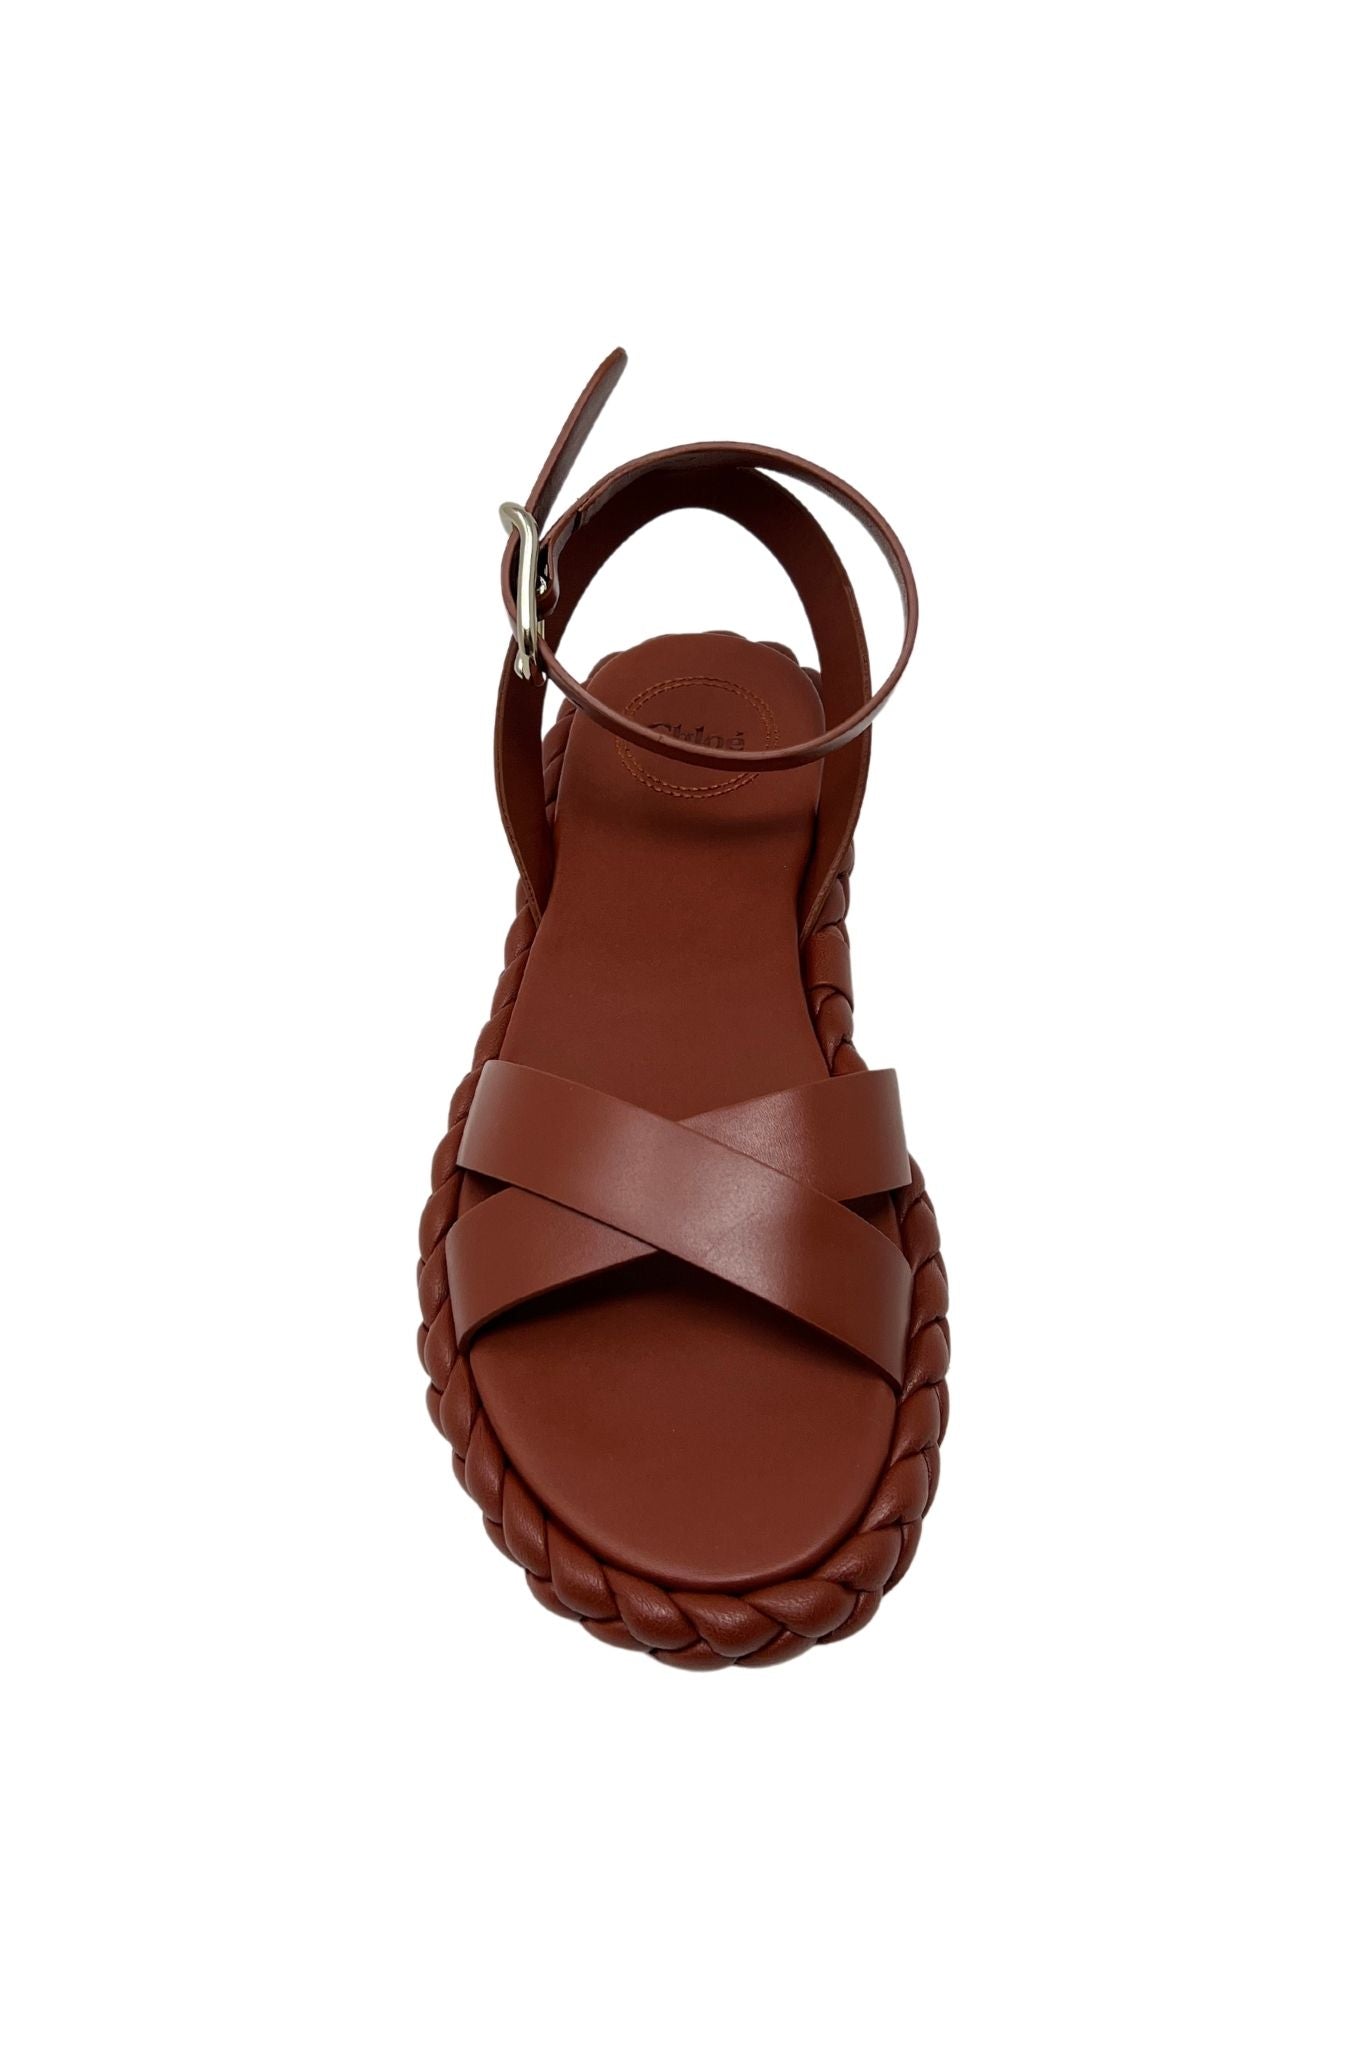 Chloe Pip Braided Leather Sole Sandals